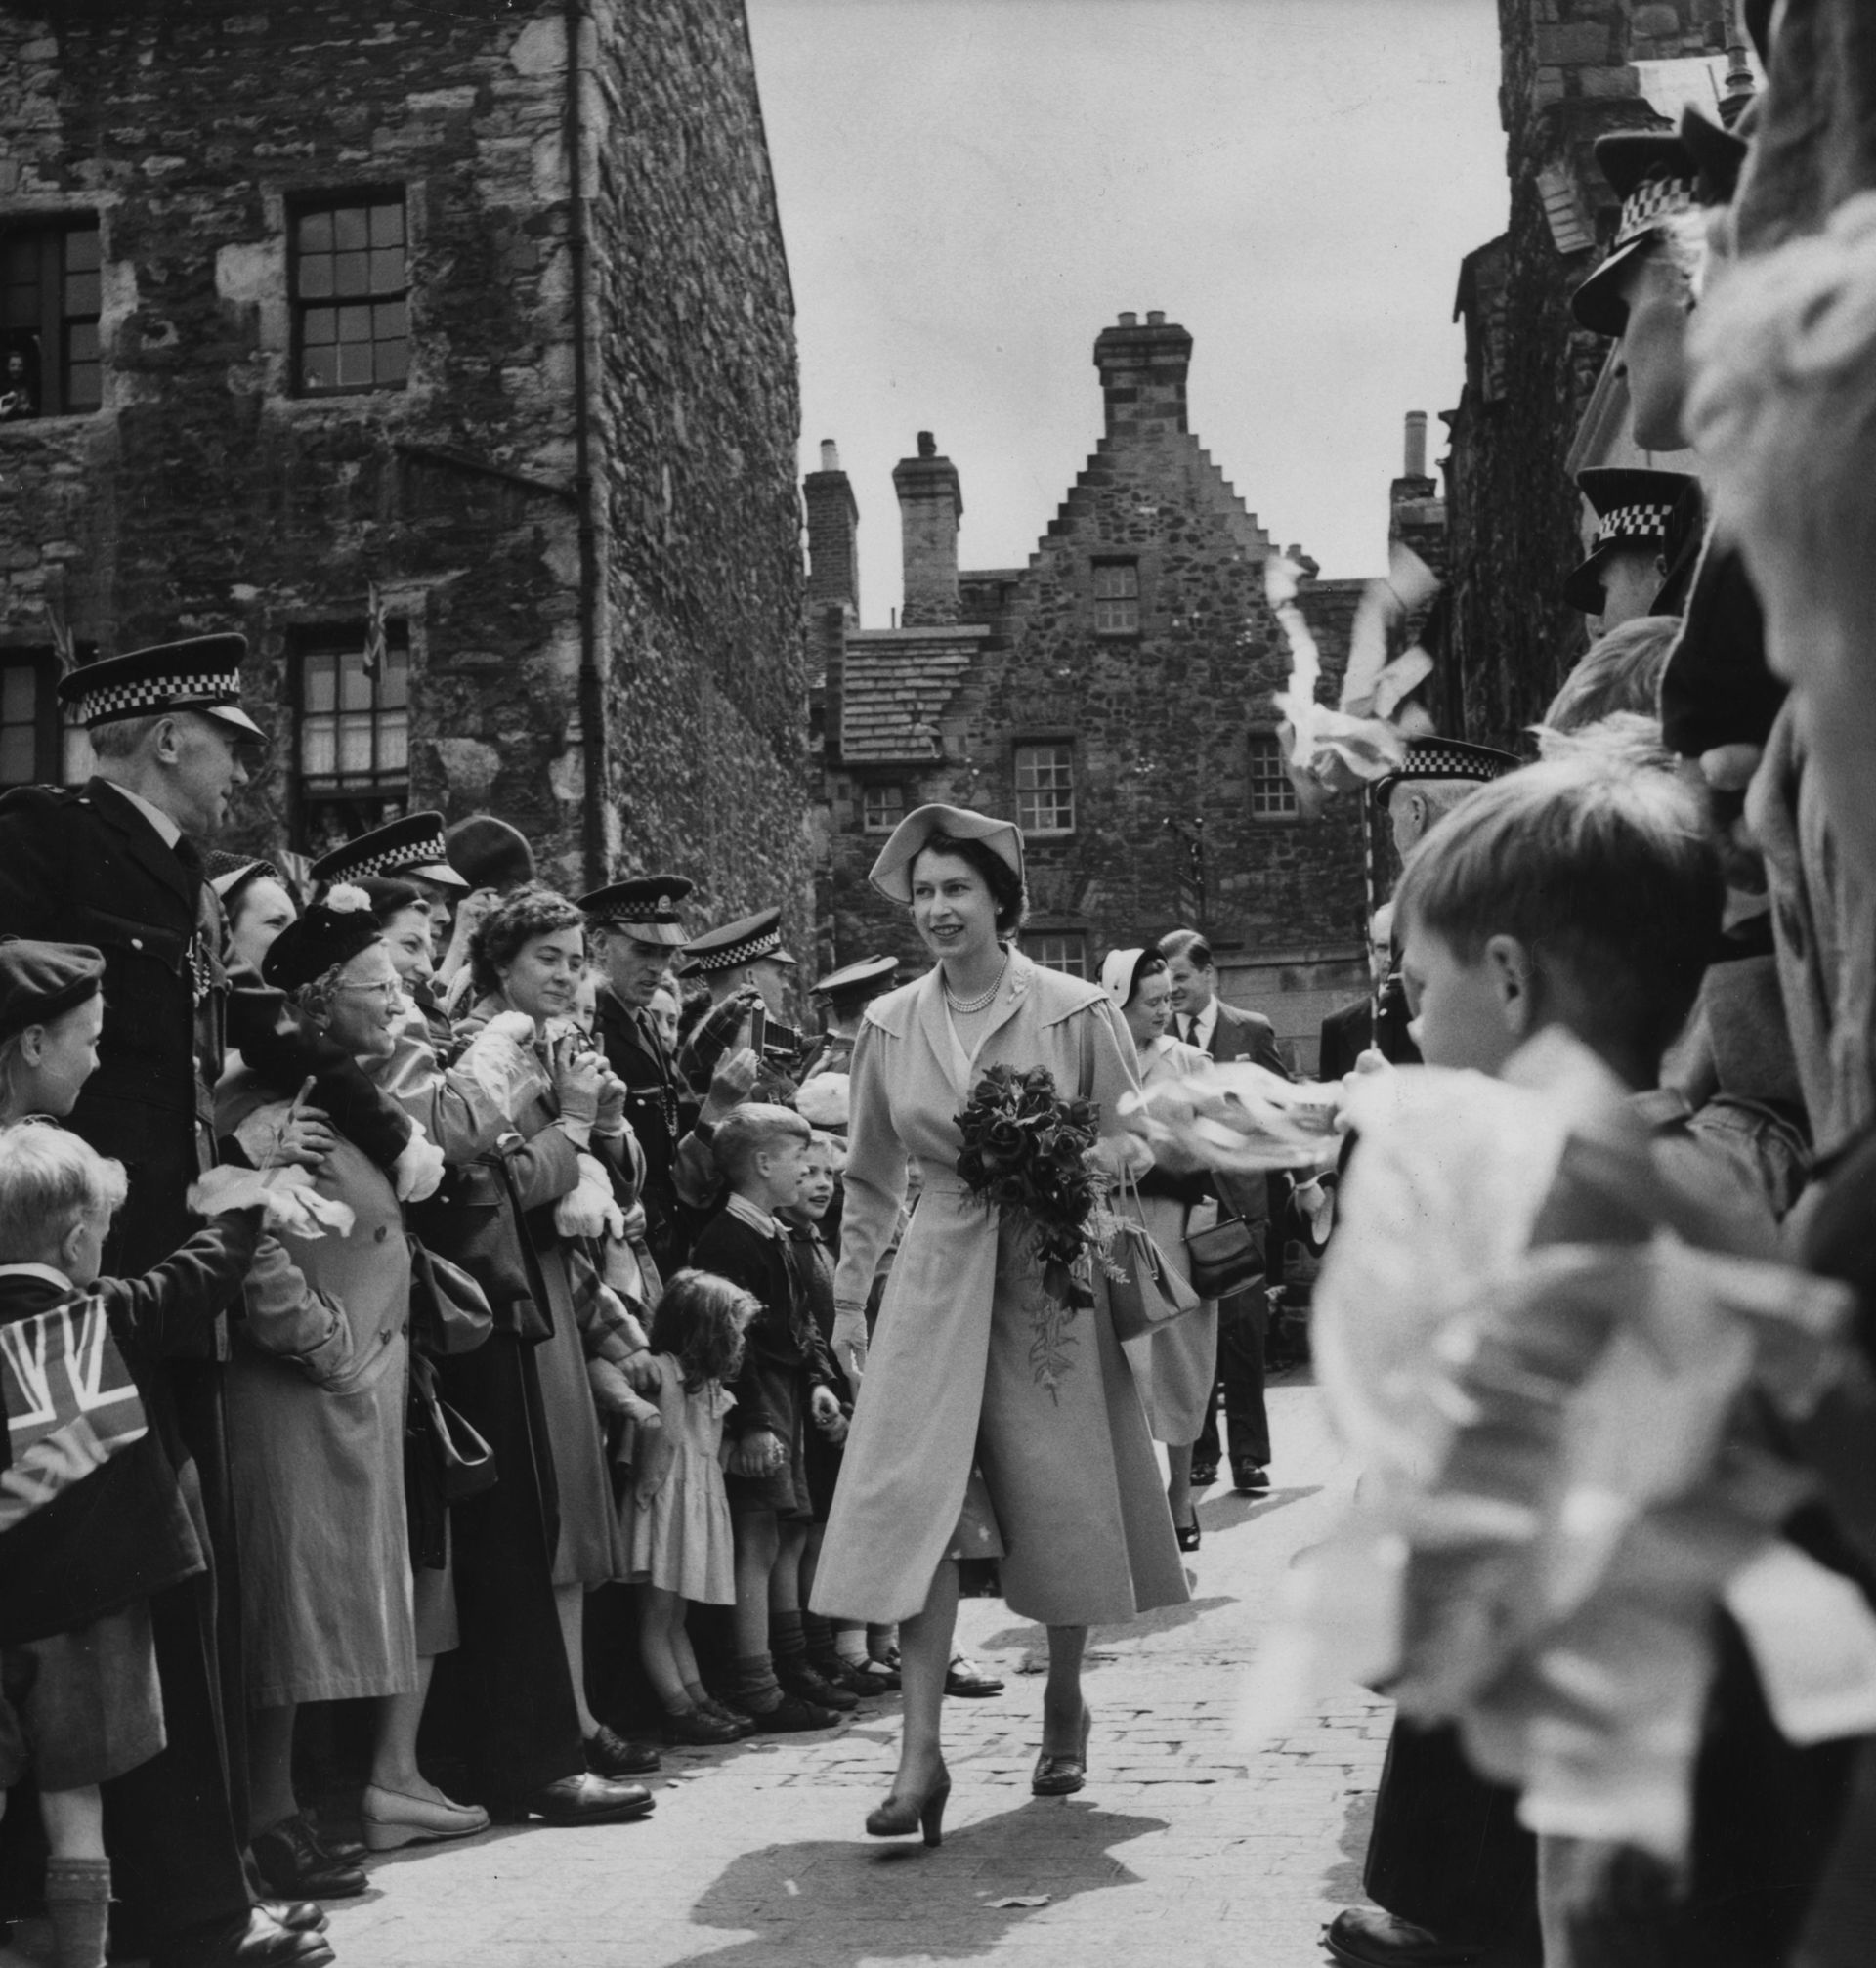 July 12, 1952:  Queen Elizabeth II on a visit to the Scottish Craft Centre, Edinburgh. The royal visit was the first by a reigning monarch in 50 years and also the first time Queen Elizabeth II had stayed at the Palace. 